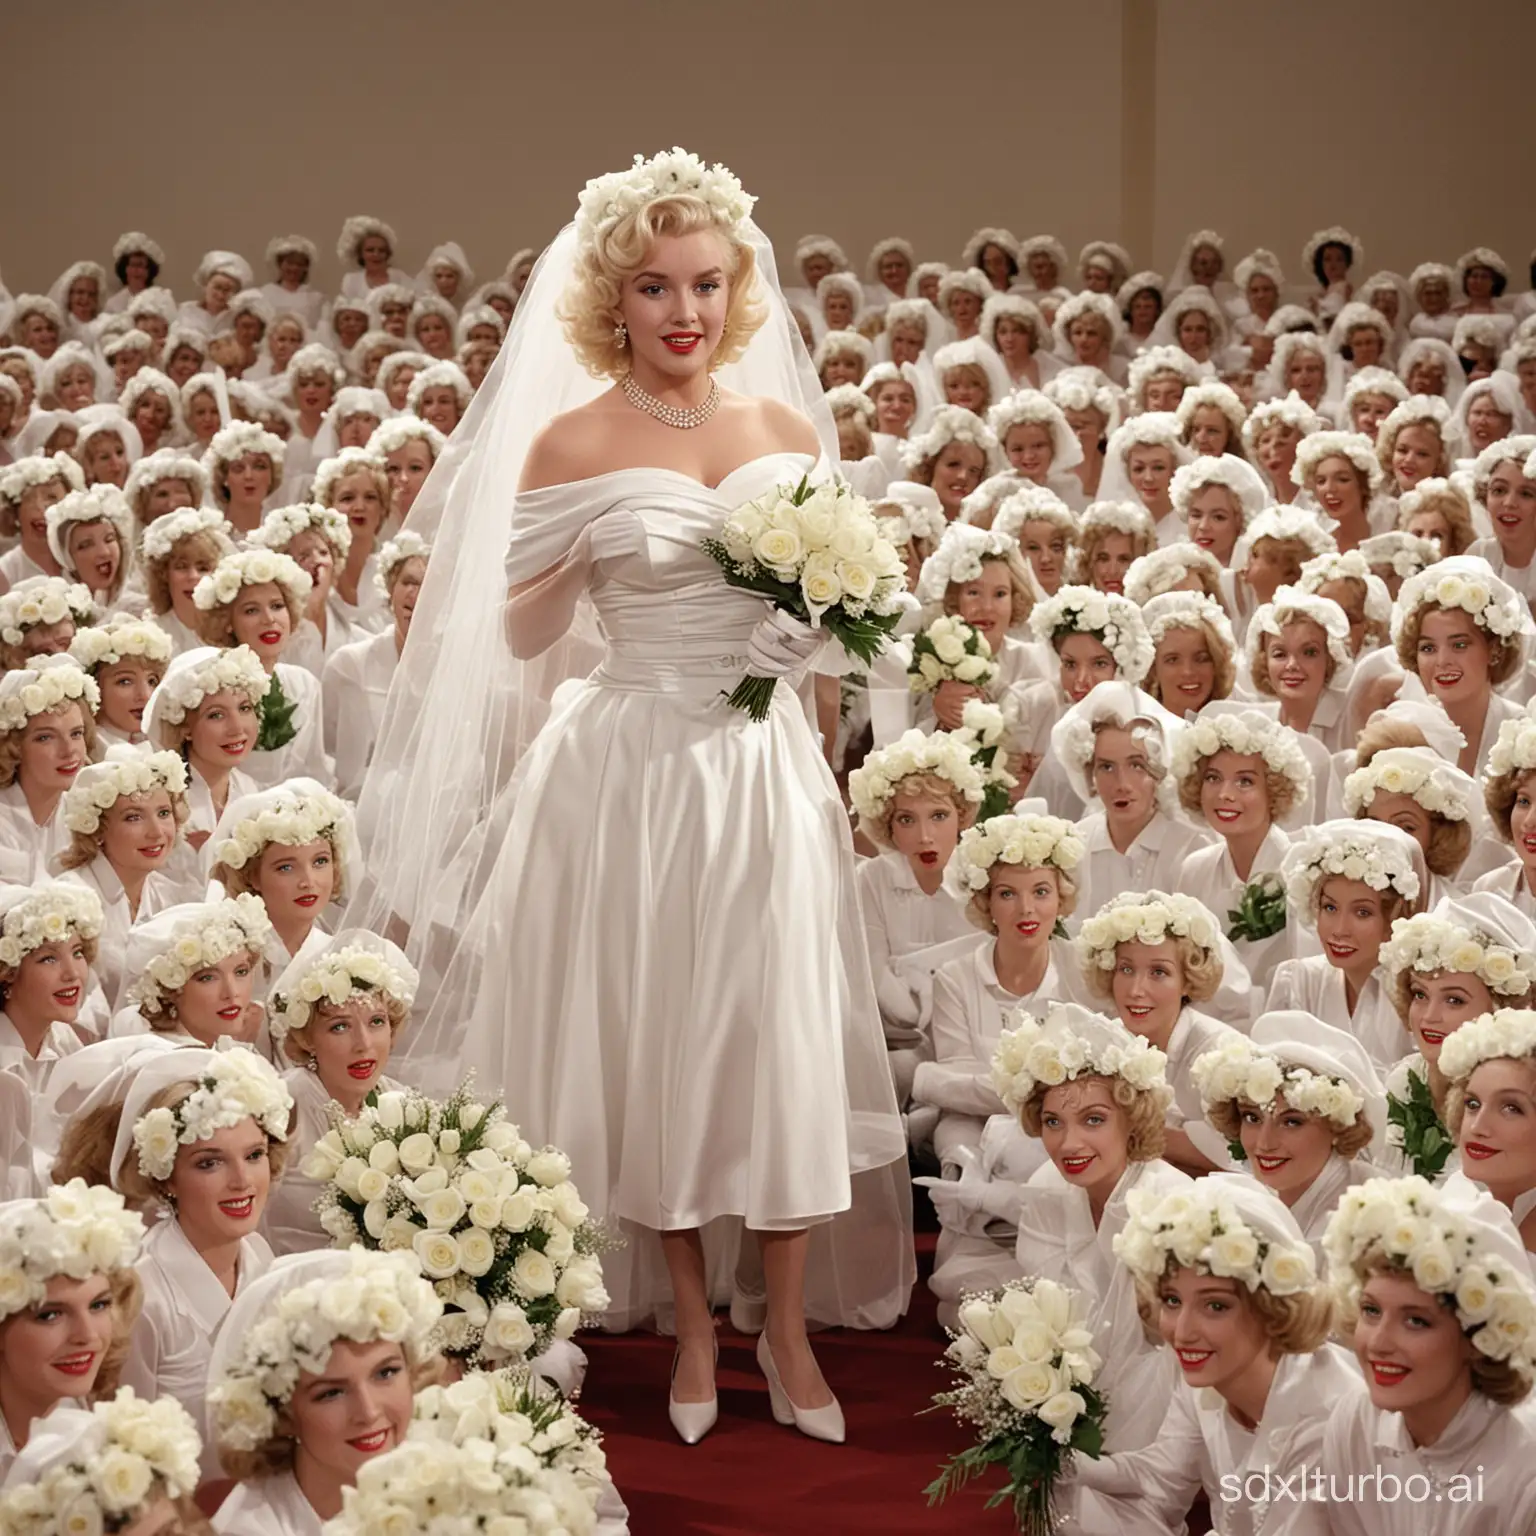 Marilyn-Monroe-Bride-Lecture-Iconic-Figure-Addresses-Clones-in-Crowded-Auditorium